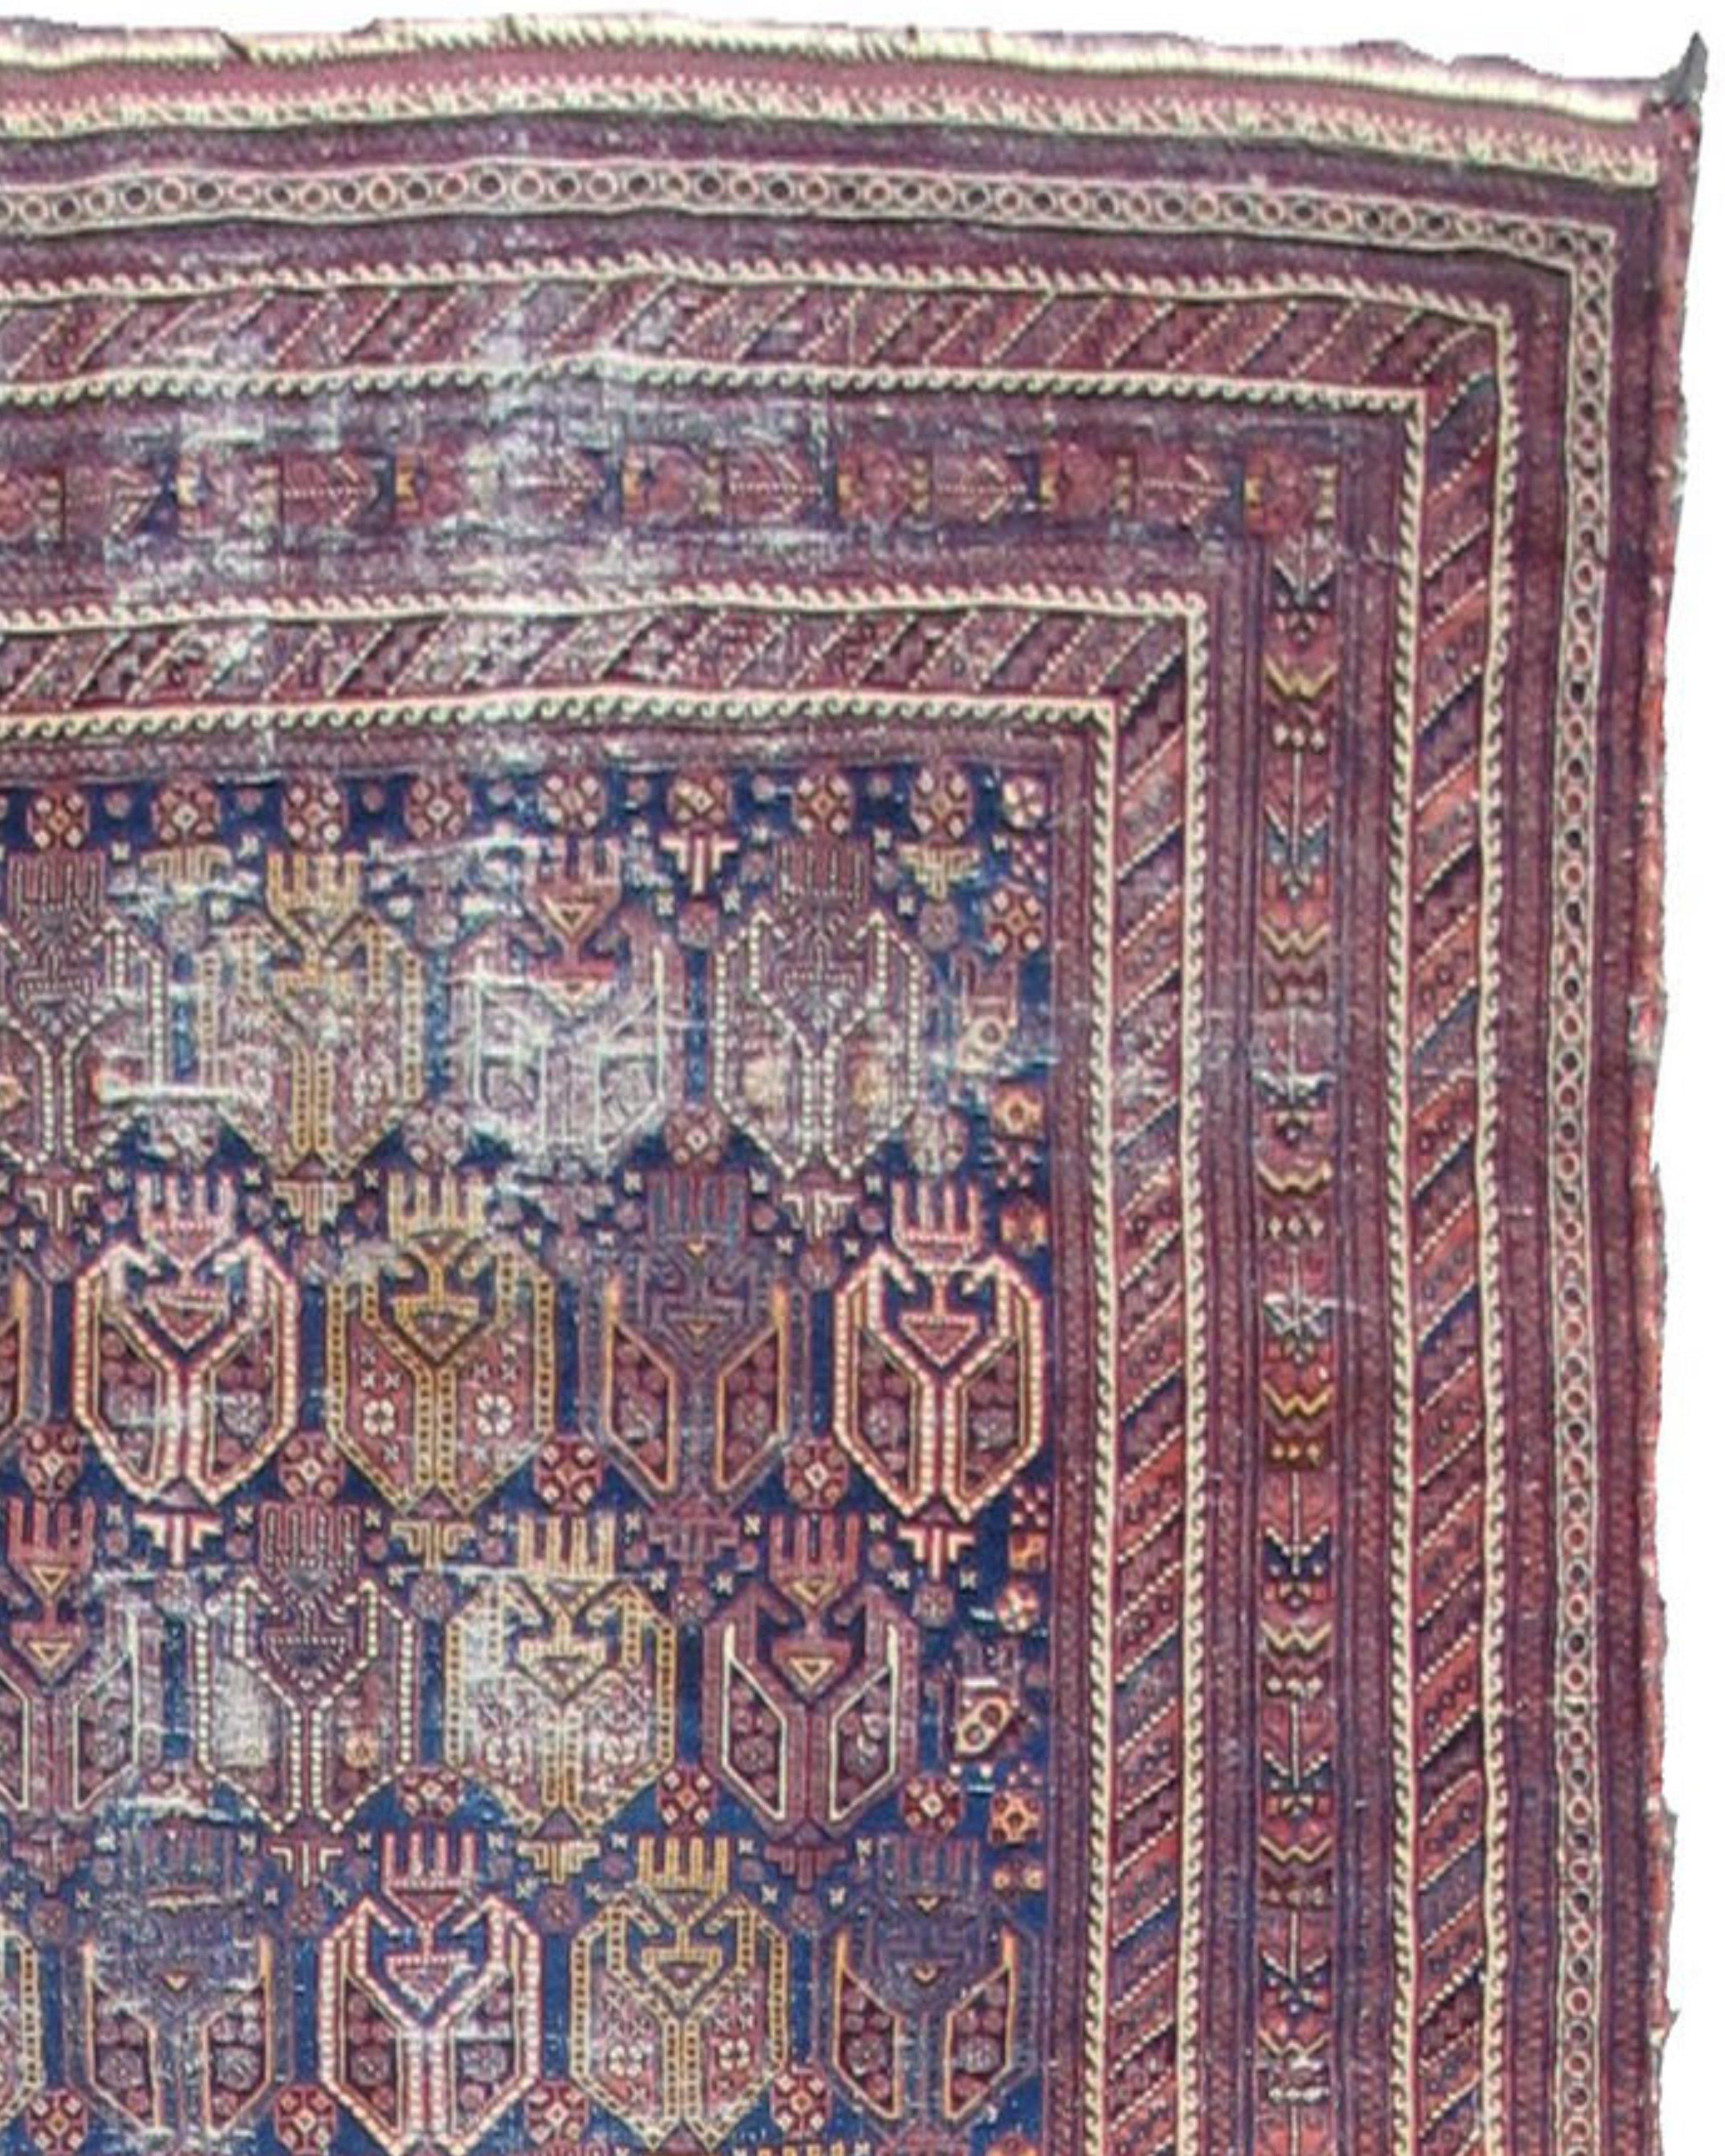 Afshar Main Carpet, Late 19th Century. 

Fair condition with general wear and wear creases. Some selvedge separation.

Additional Information:
Dimensions: 6'8